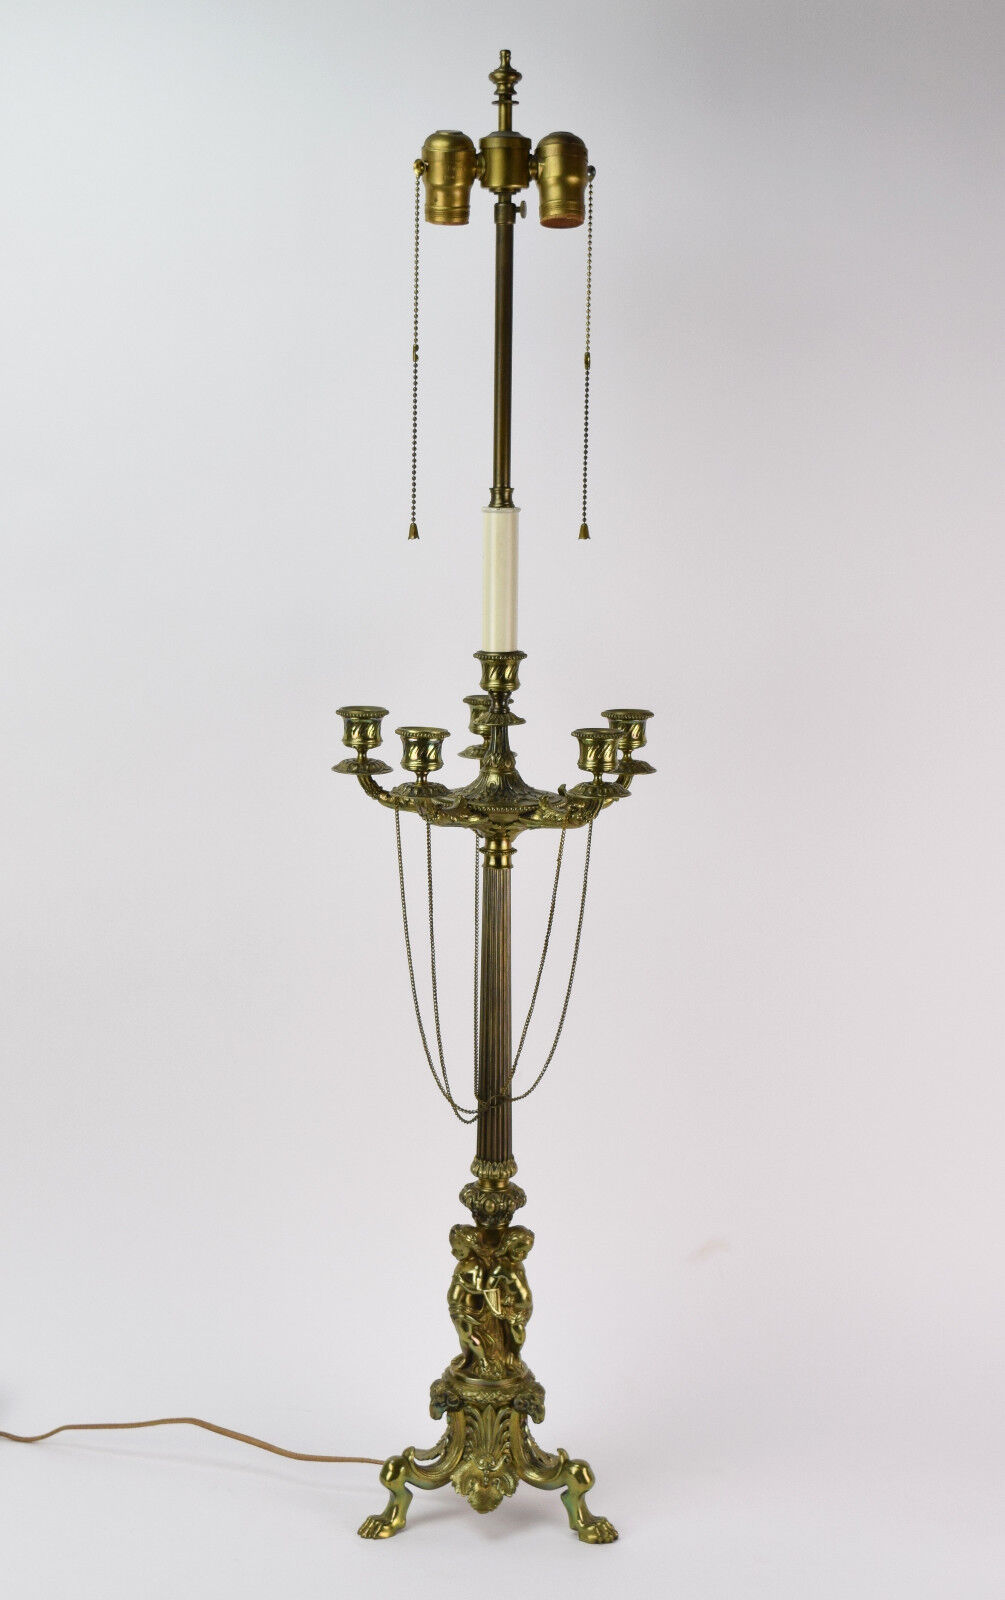 Neo-Classical French Empire Candelabra Table Lamp Cherubs Rams Heads Paw Feet